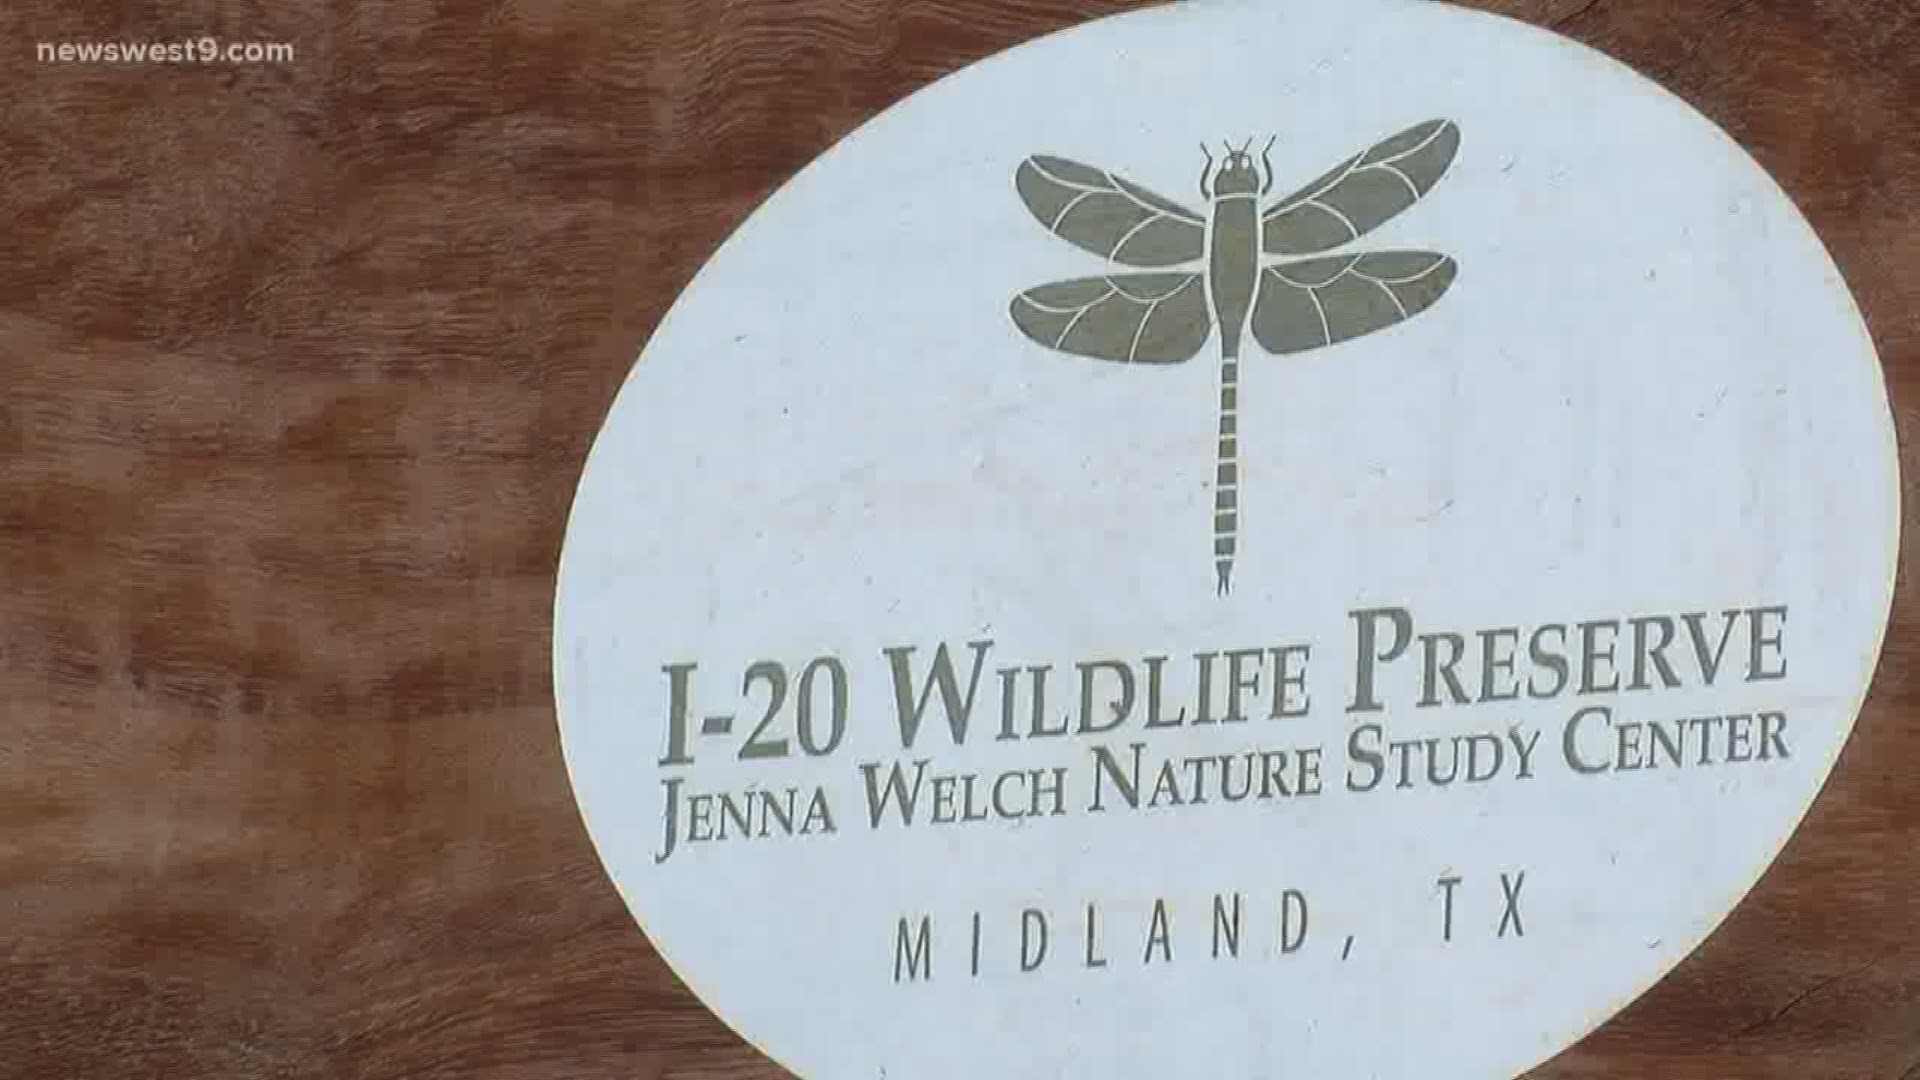 The preserve hopes to soon have a butterfly meadow as well as more classrooms and a space for food trucks.